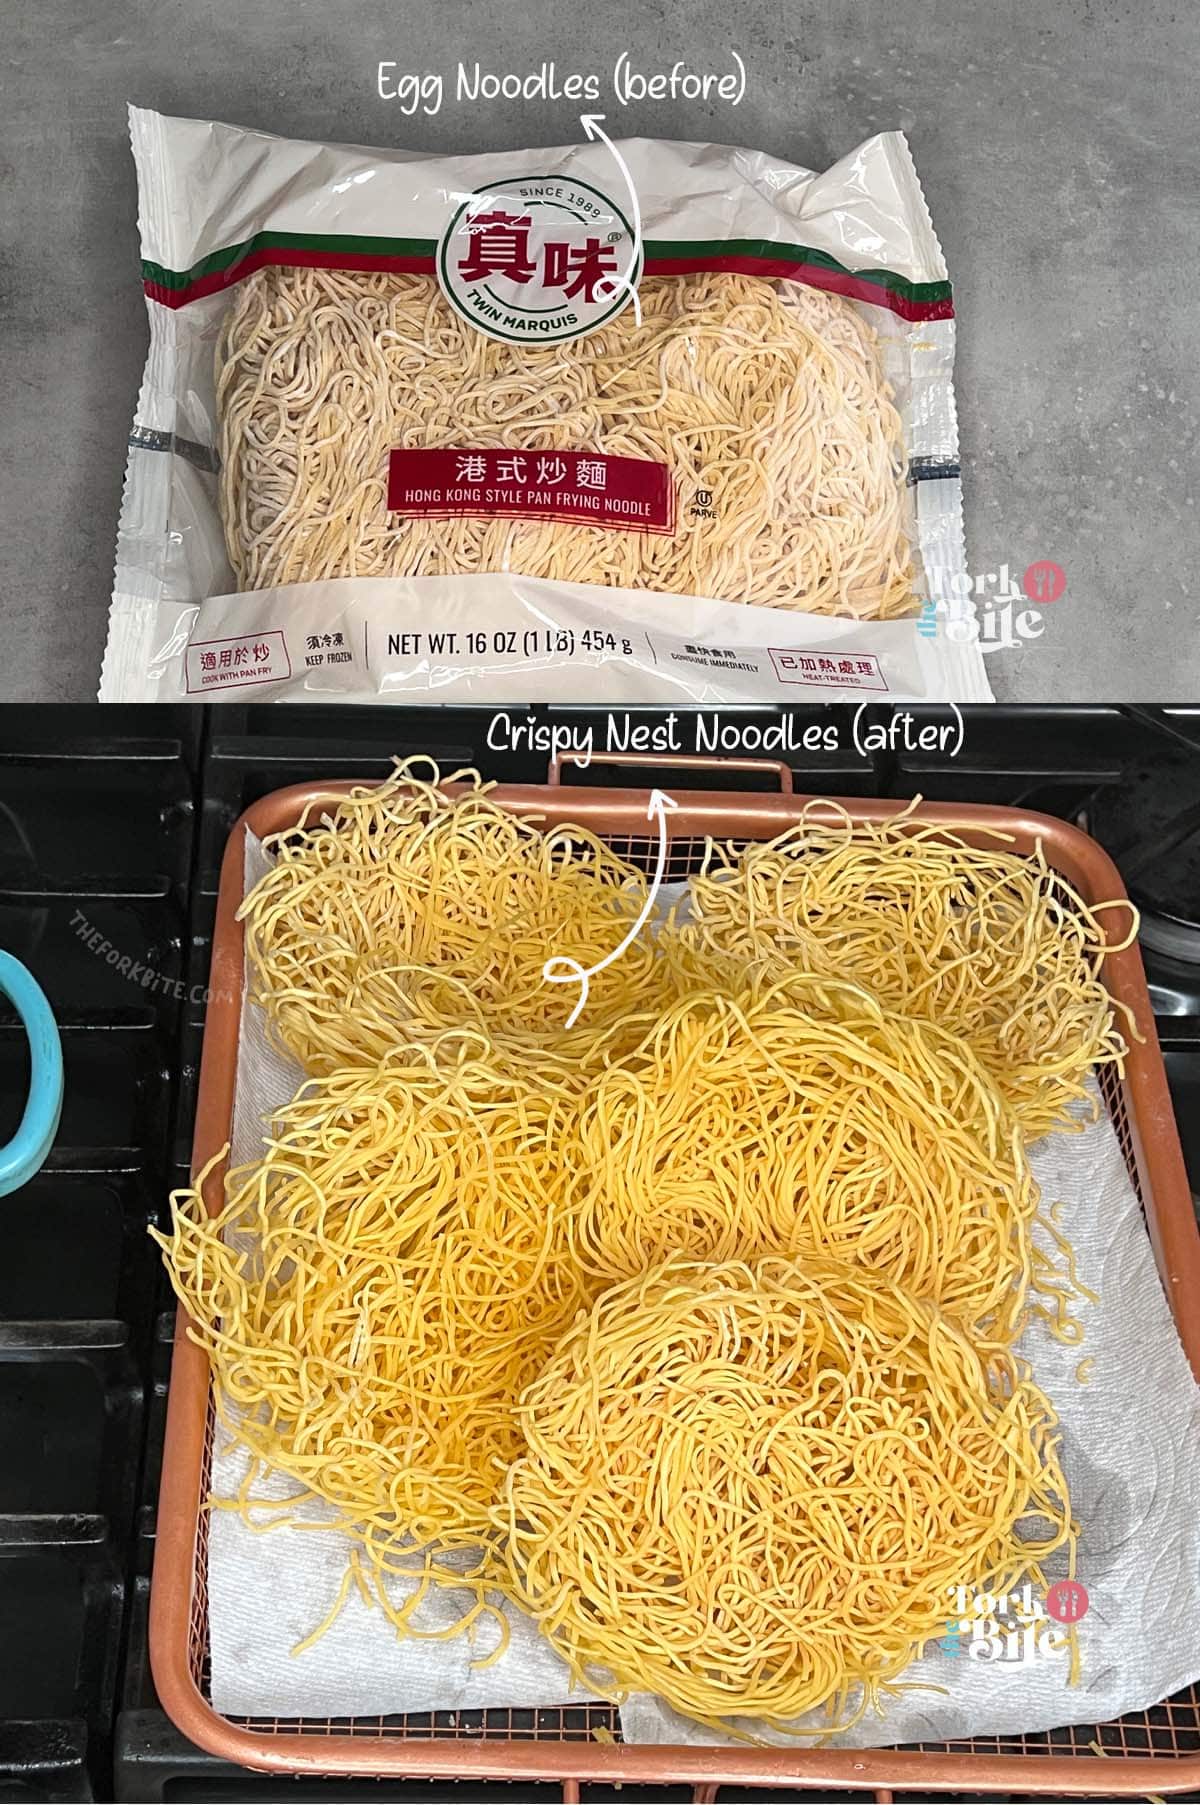 These nest noodles serve as the base of the dish and are fried until crispy to form "bird's nests."